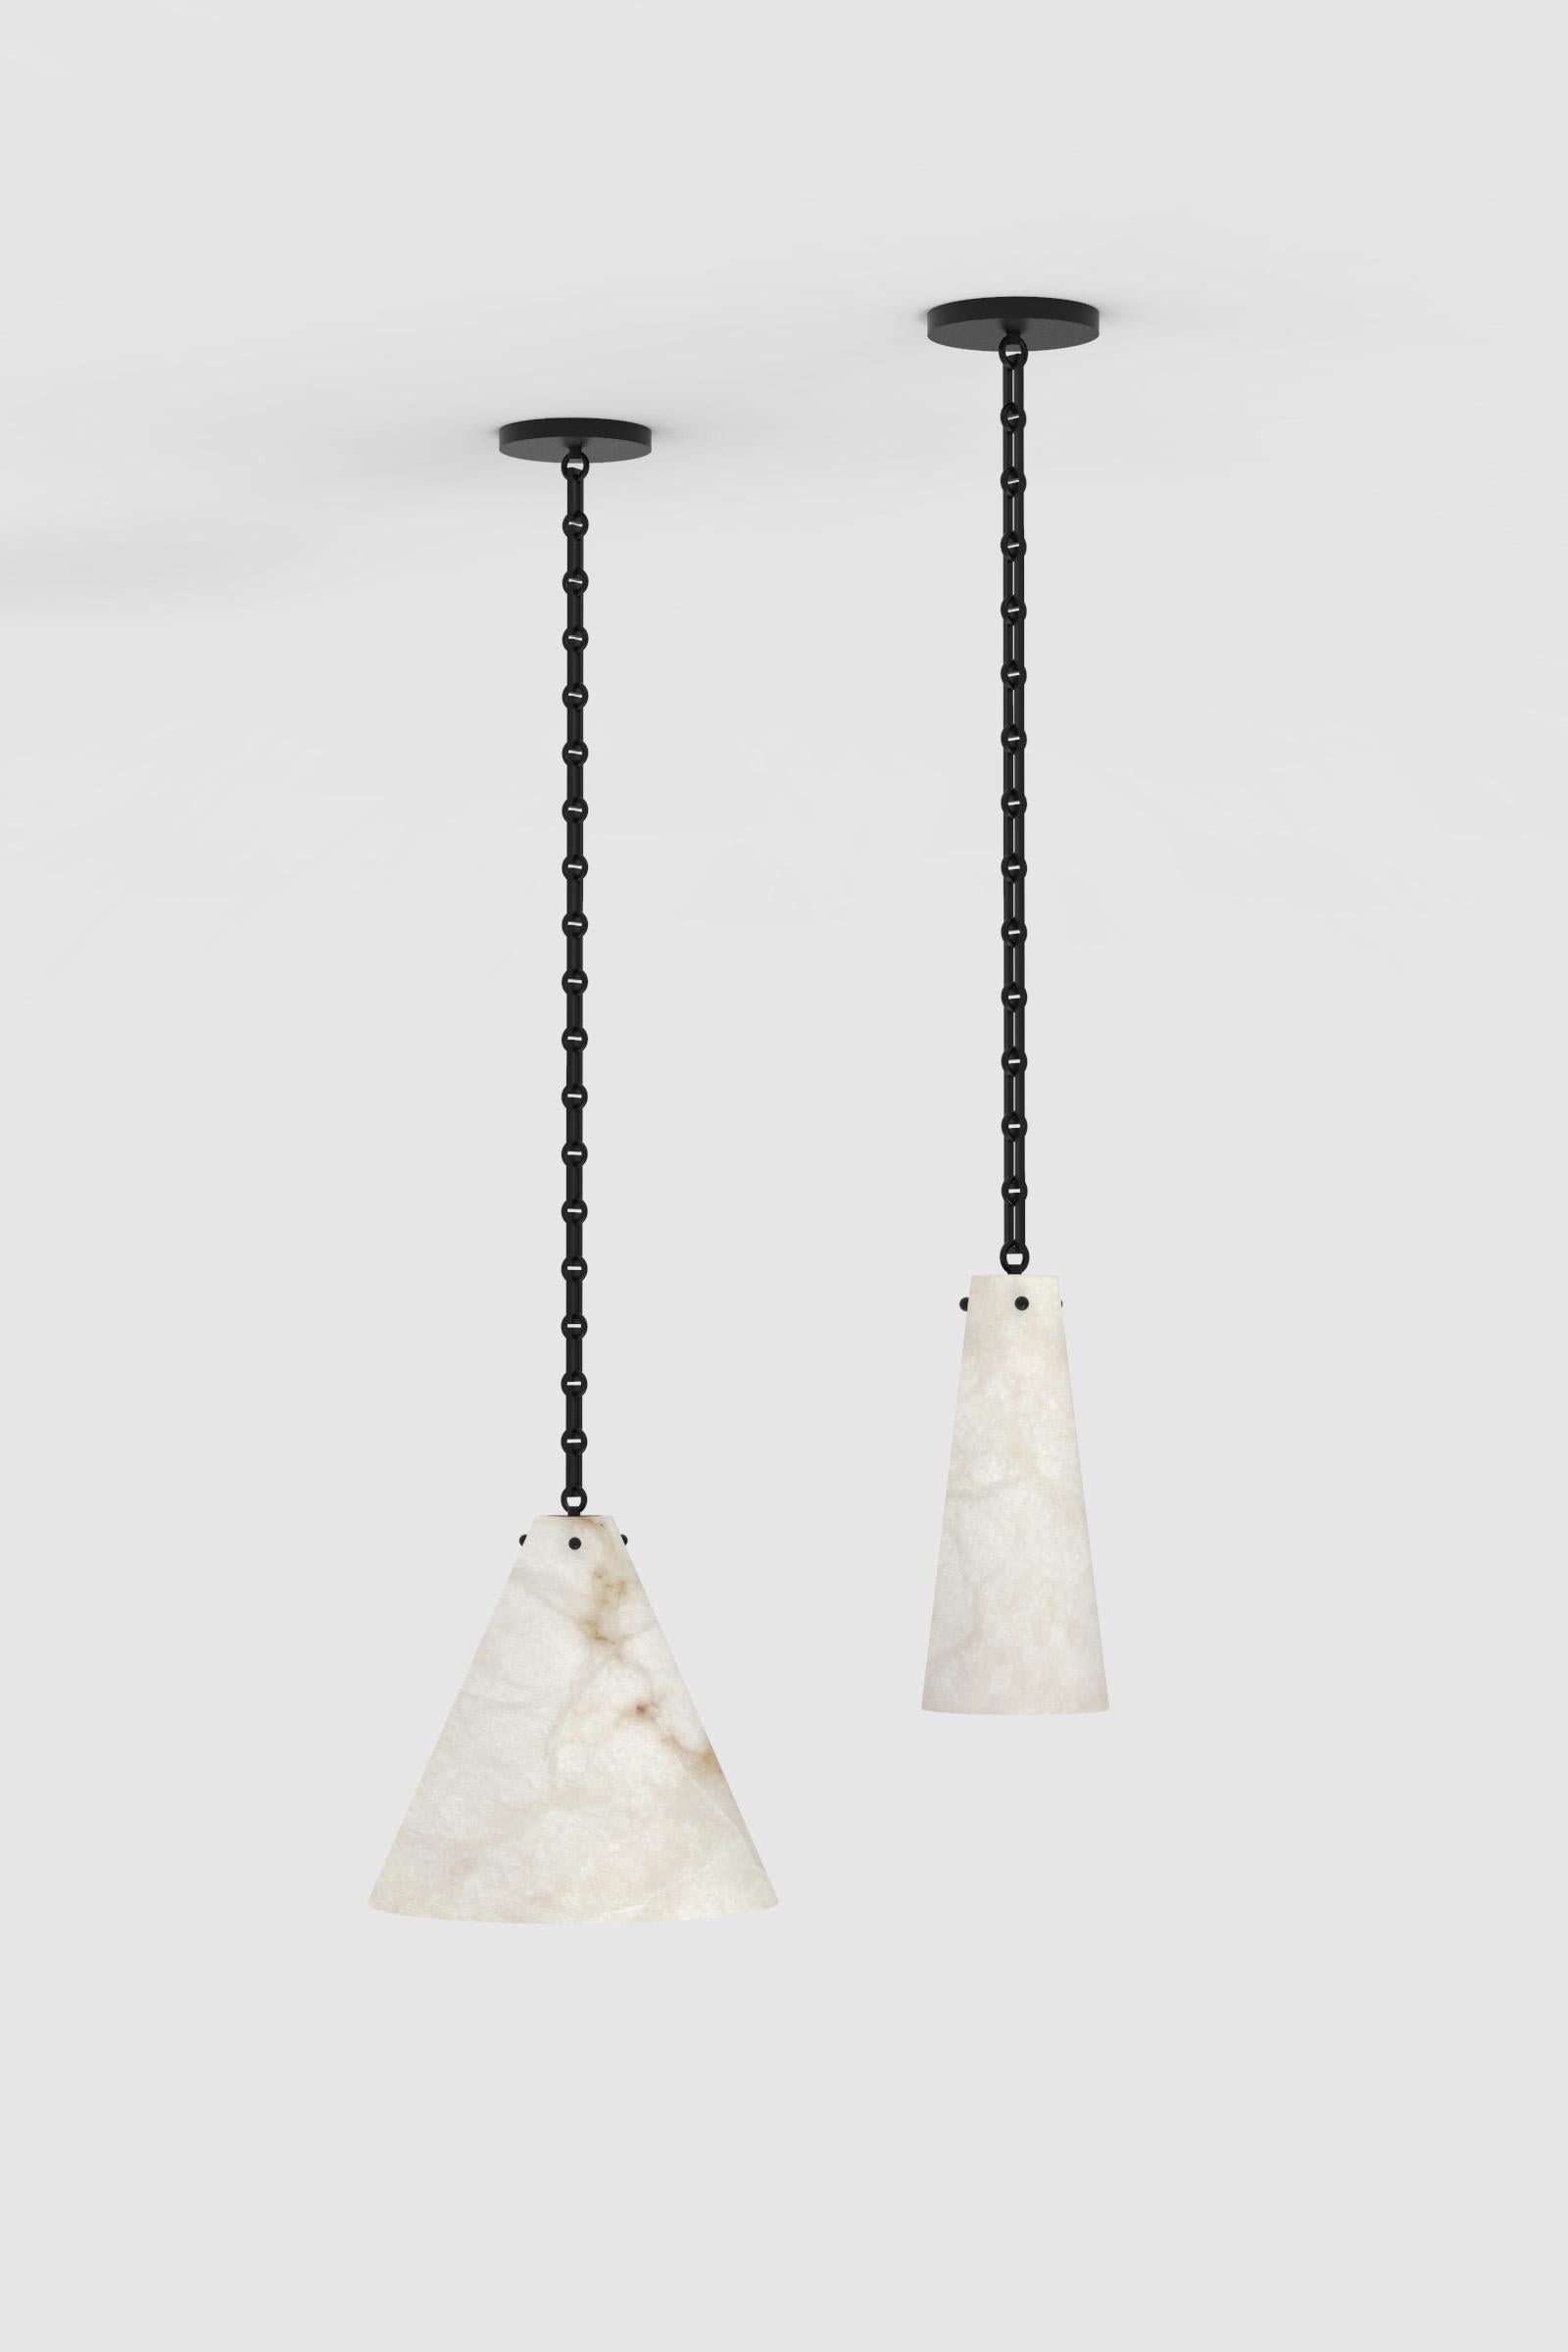 Blackened Contemporary Lucca Large Pendant 202A in Alabaster by Orphan Work For Sale